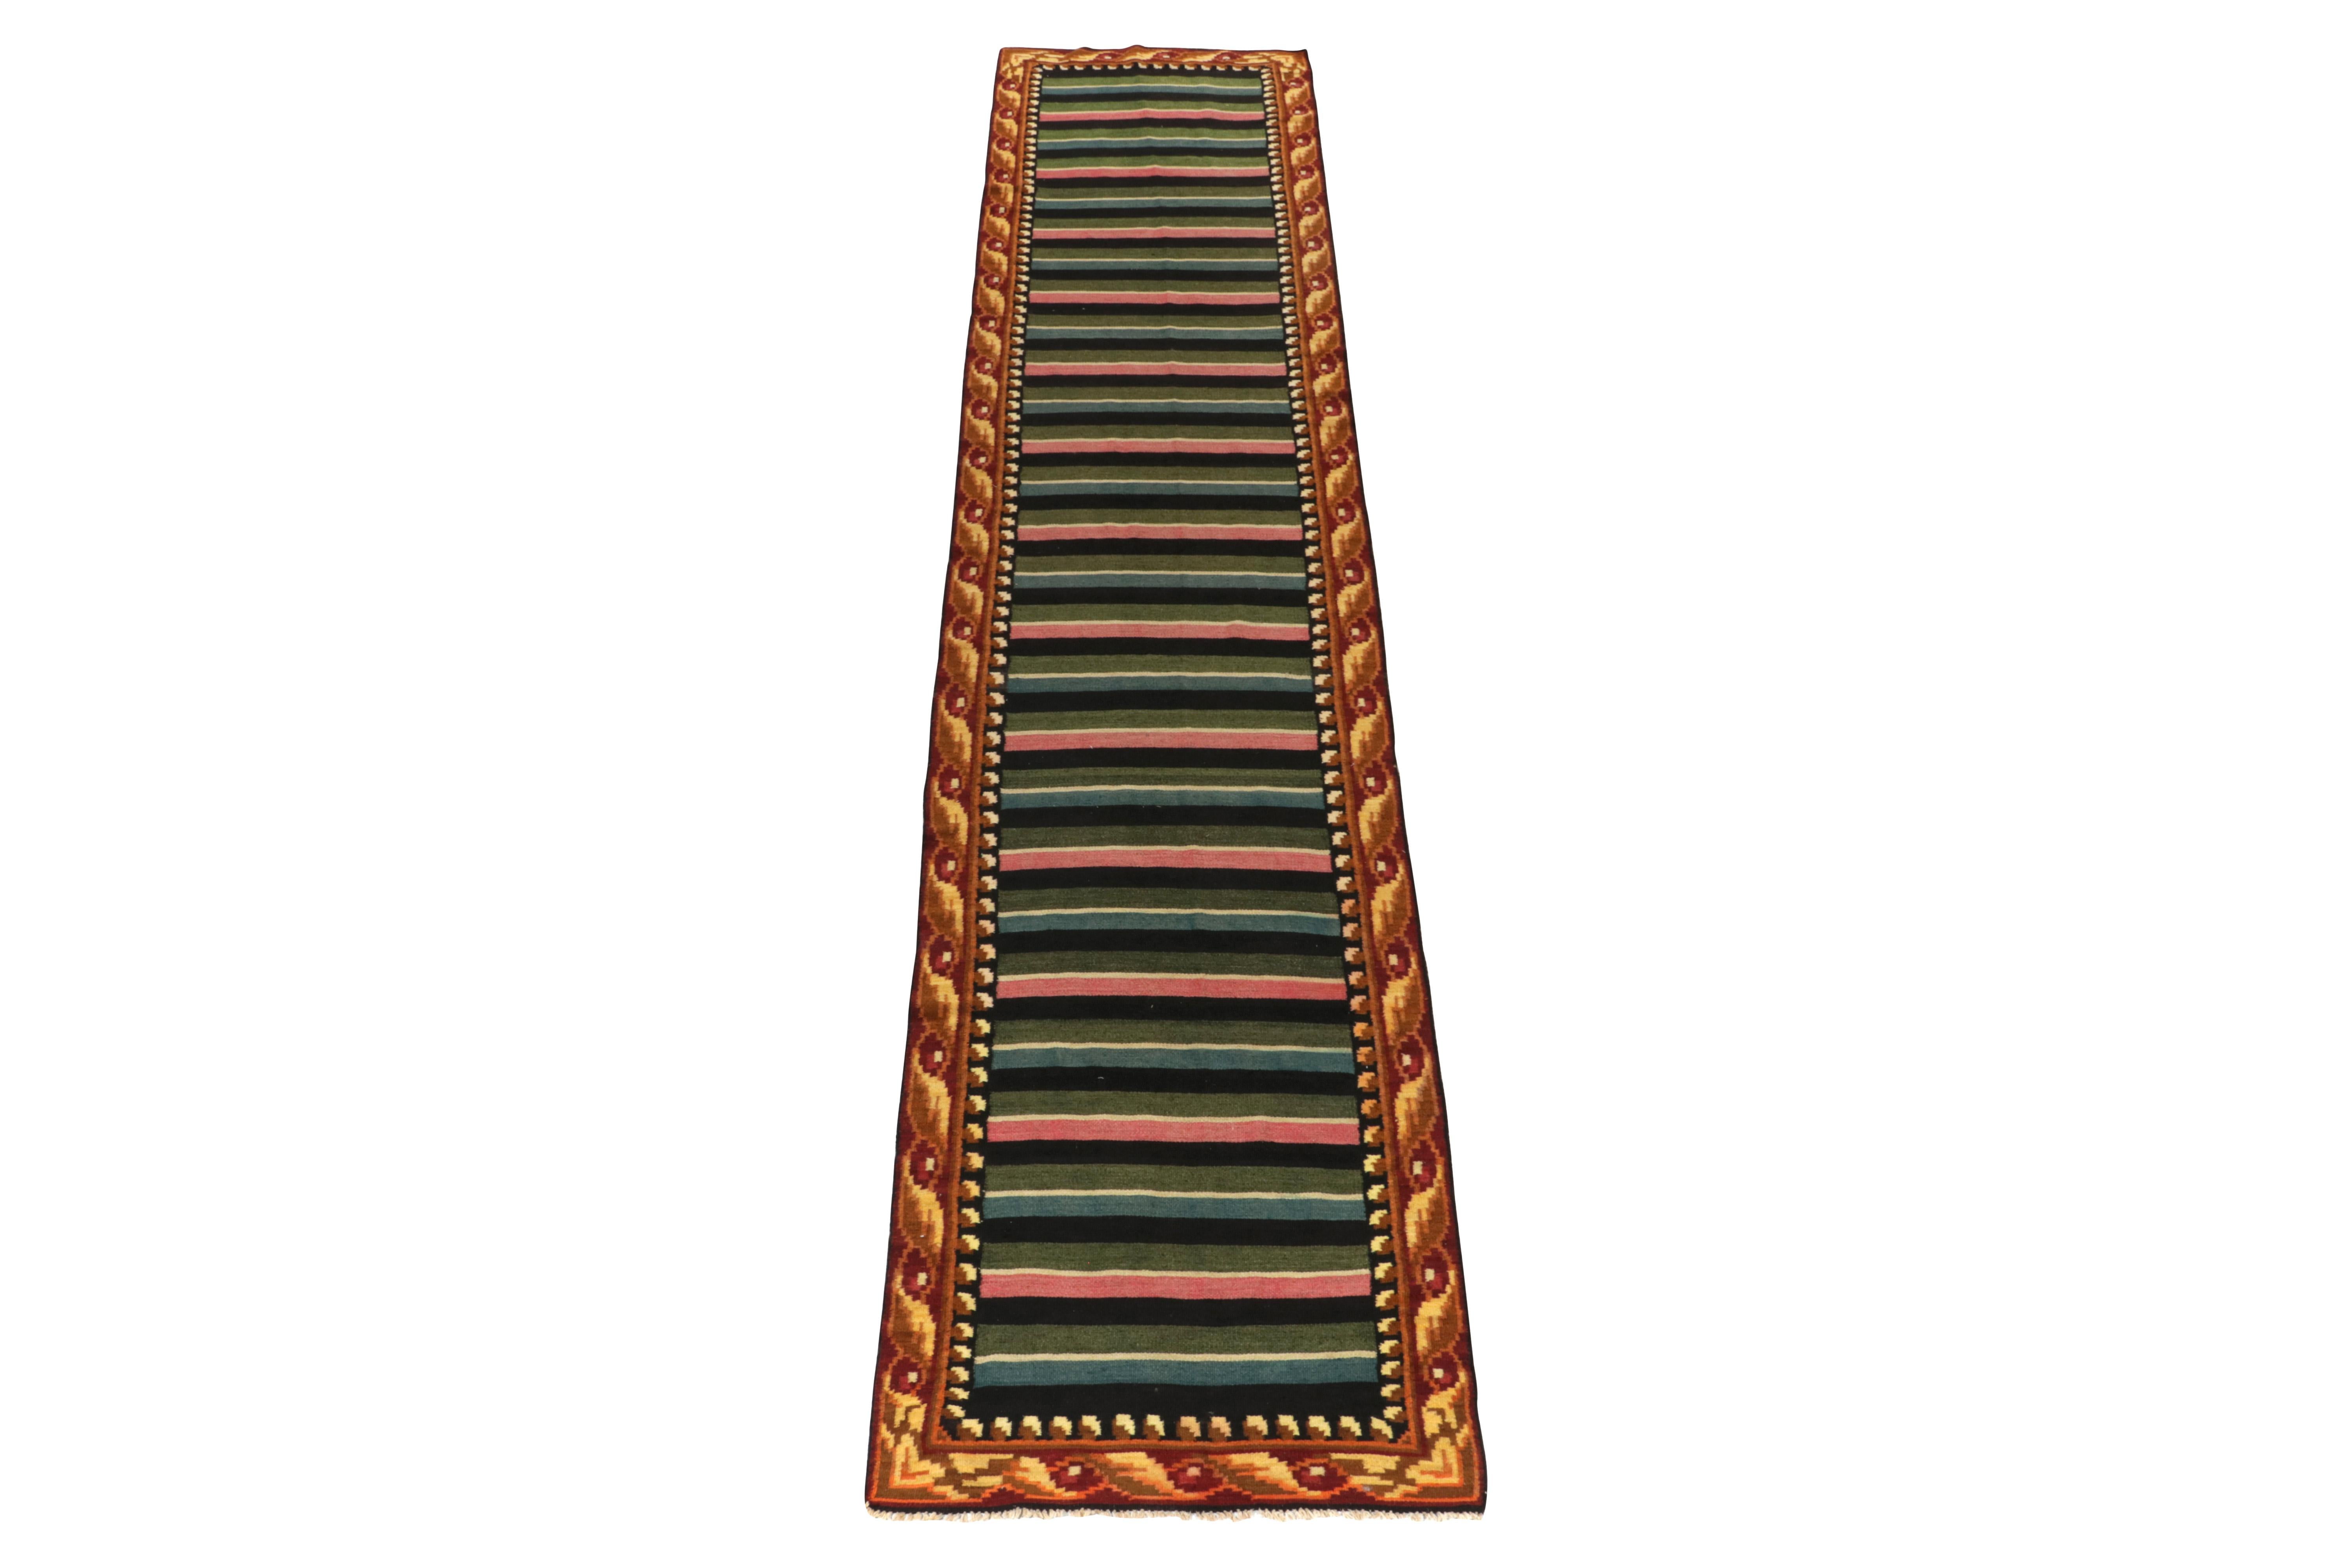 Handwoven in wool, a rare 3x16 Moldovian kilim runner from our vintage selections enjoying one-of-a-kind geometry. 

Belonging to the 1950s, the piece enjoys an exclusive length and polychromatic stripes carrying a more modern appeal given the era